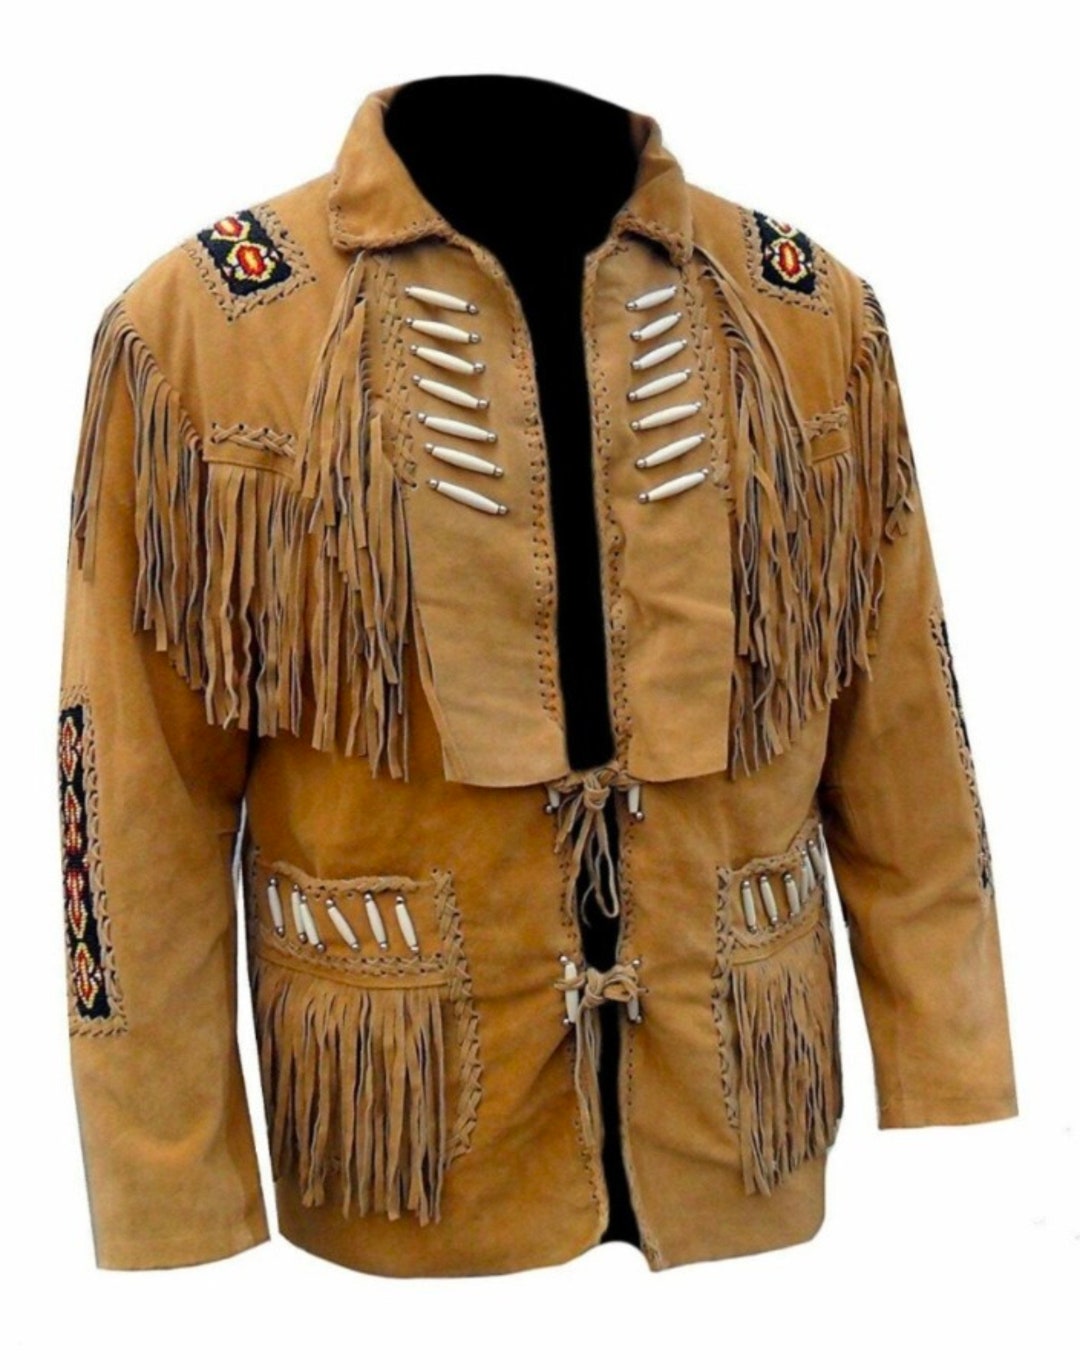 New Mens Native American Cowboy Buckskin Leather Jacket Coat With ...